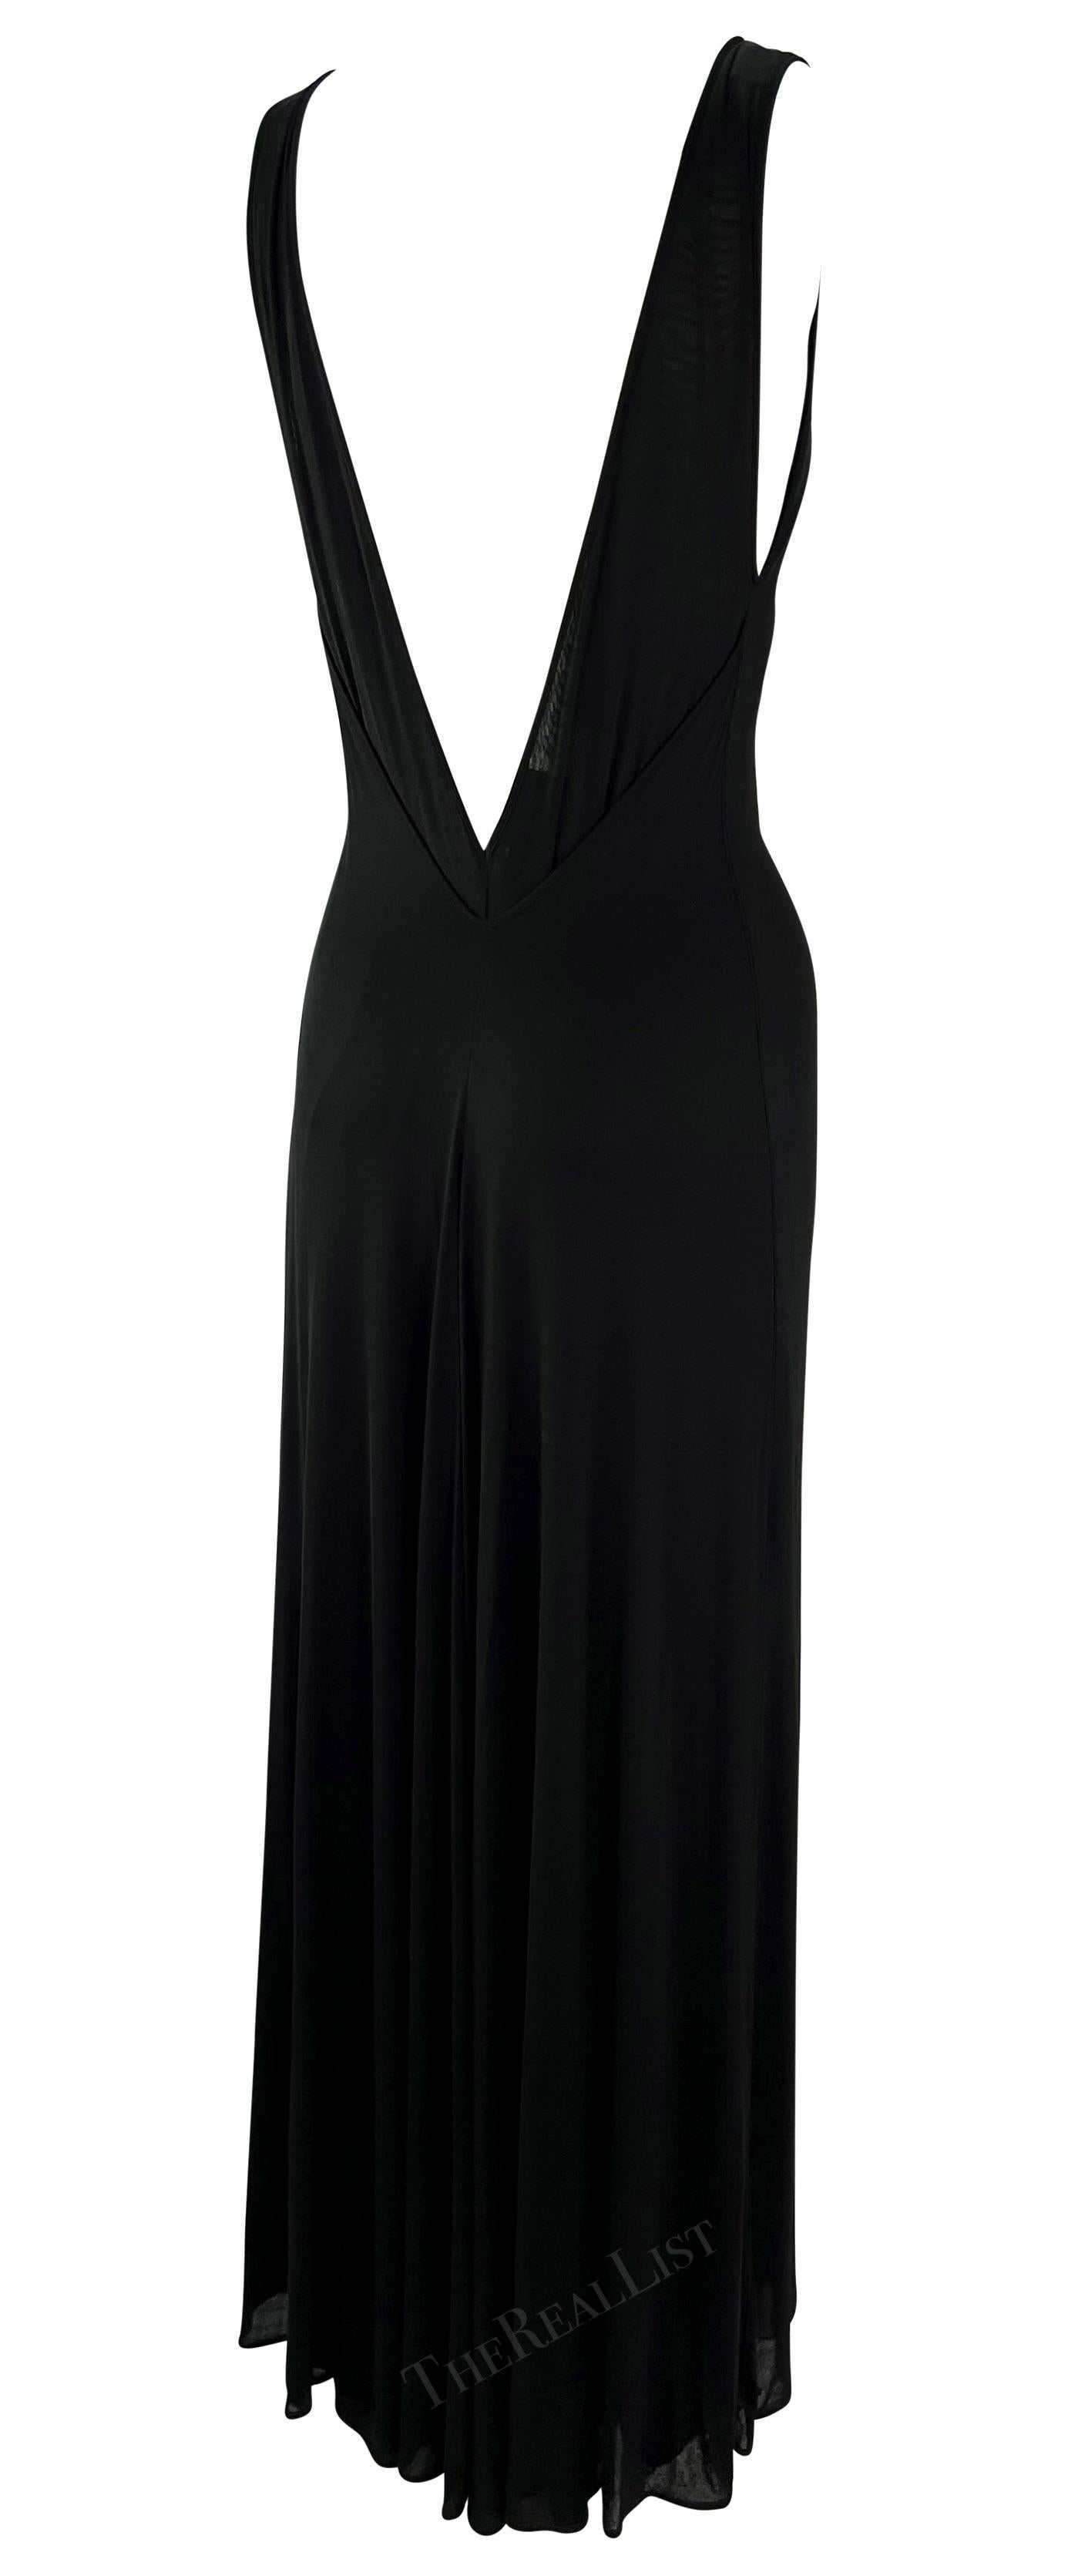 Presenting a stunning black Giorgio Armani Black slip gown. From the late 1990s, this fabulous knit stretch dress features a wide scoop neckline. The dress is amped up with a deep plunging back that tapers to a v-shape leaving the back exposed. The